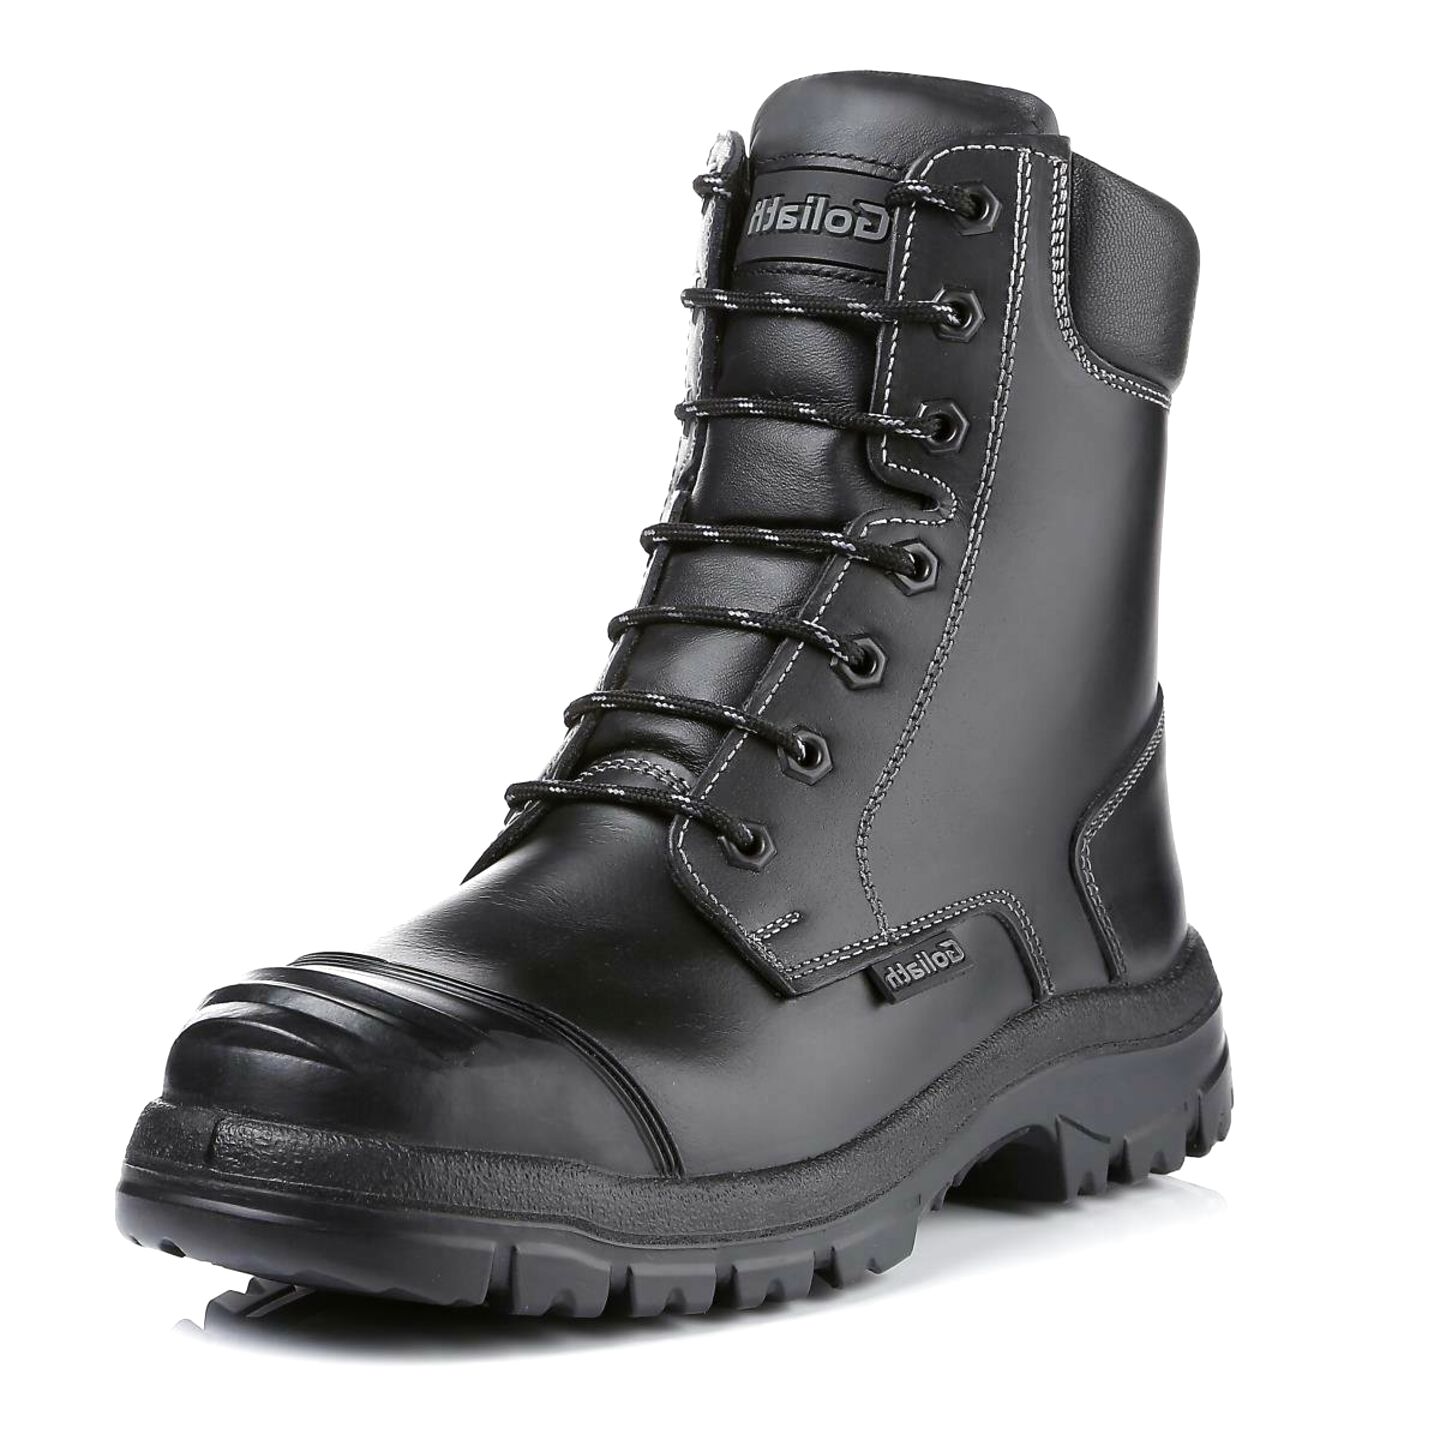 Goliath Safety Shoes for sale in UK | 43 used Goliath Safety Shoes